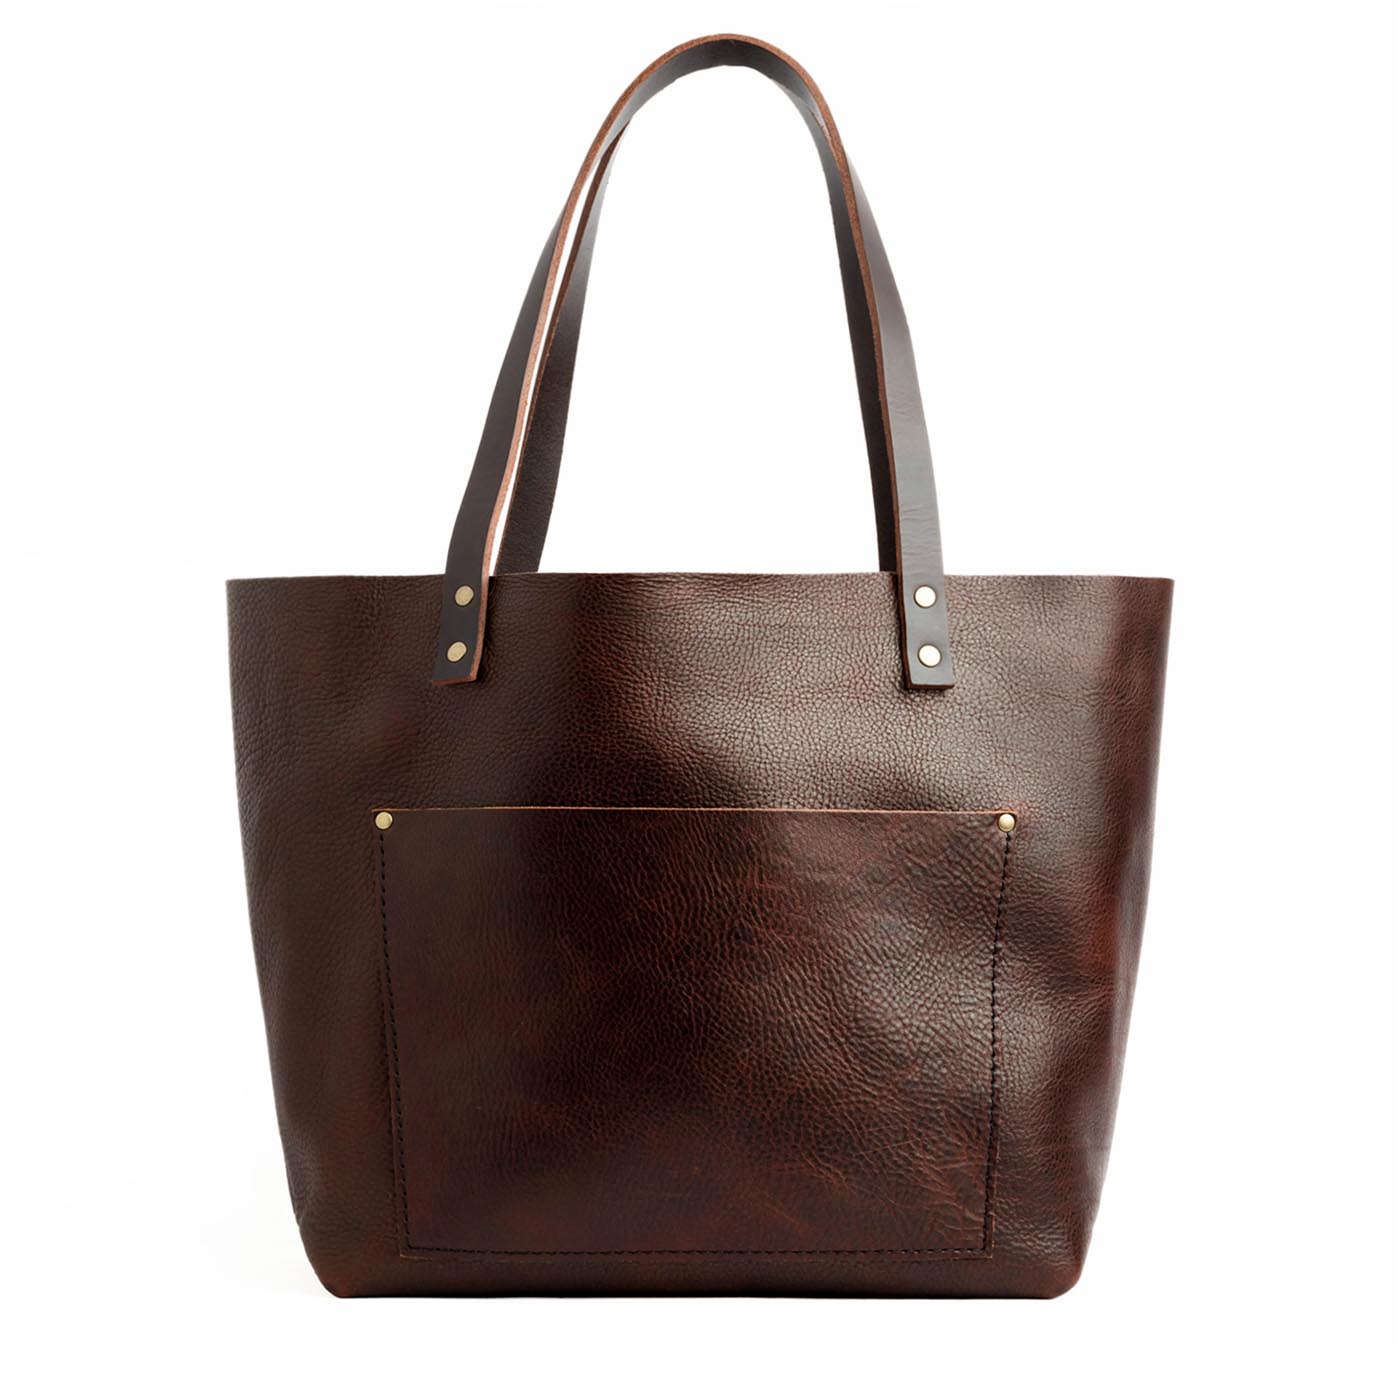 Coldbrew*Classic | Large leather tote bag with sturdy bridle handles and front pocket